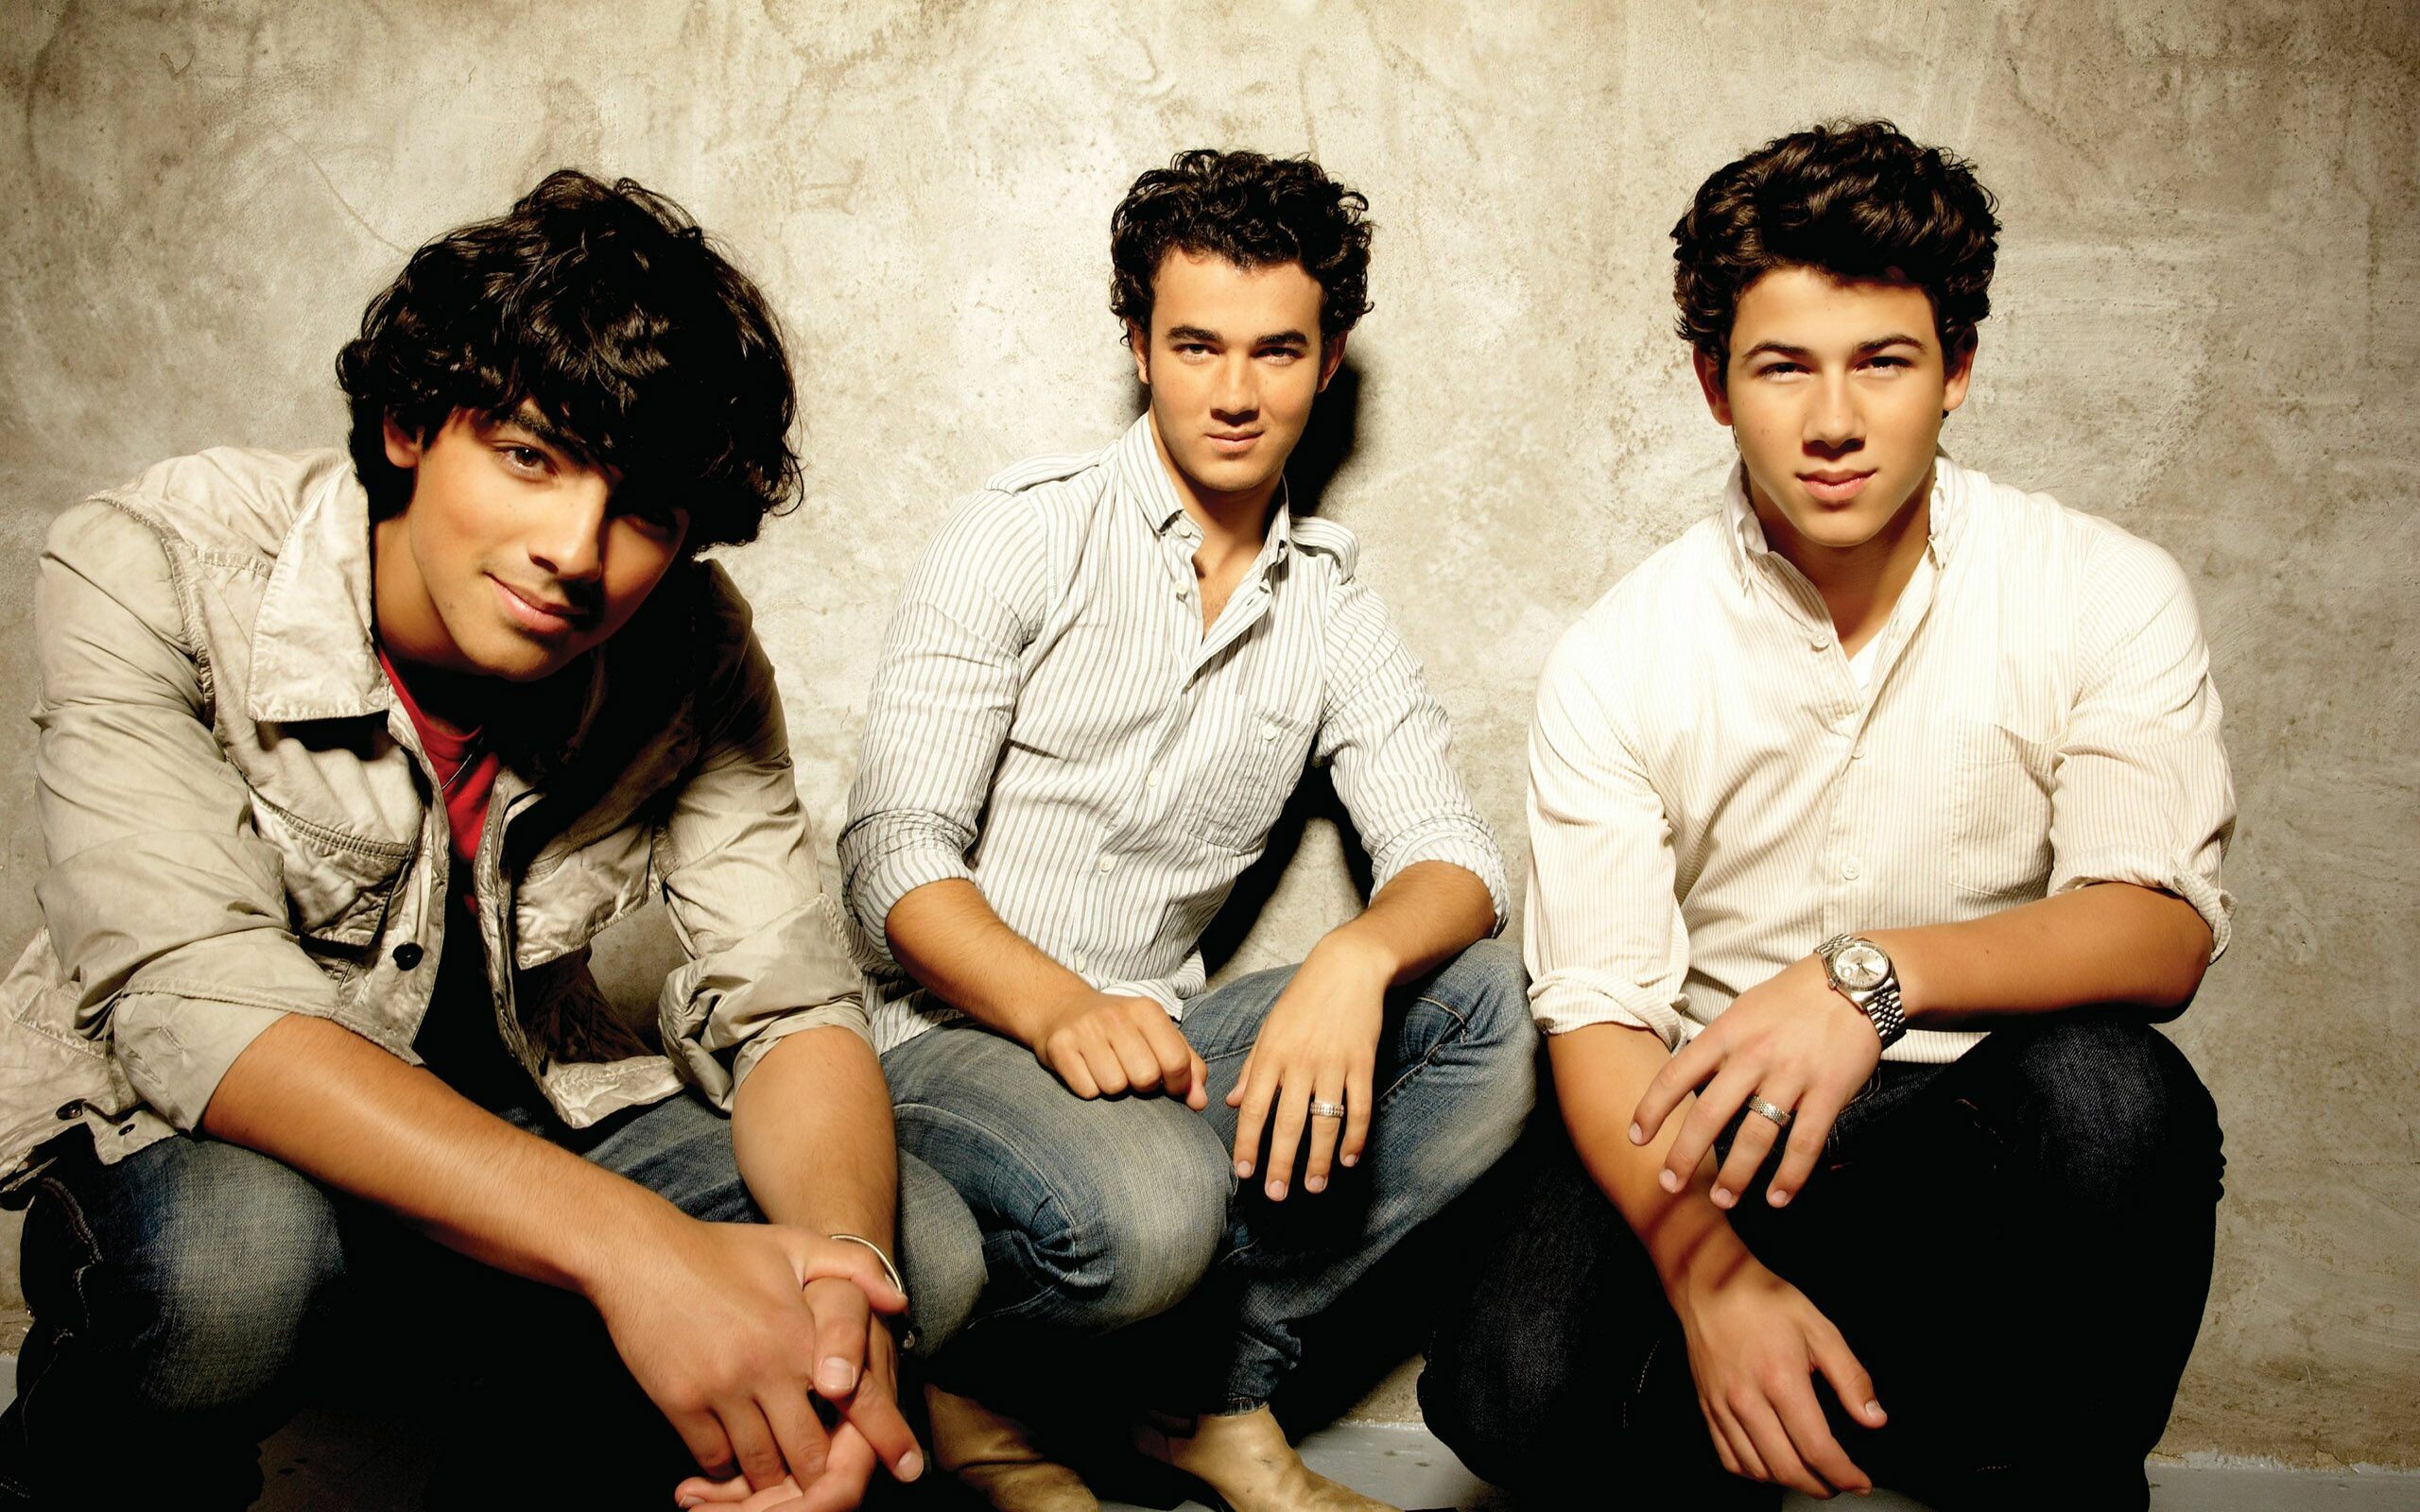 Jonas Brothers: "Burnin' Up" was released as the lead single from their third studio album, A Little Bit Longer. 2560x1600 HD Wallpaper.